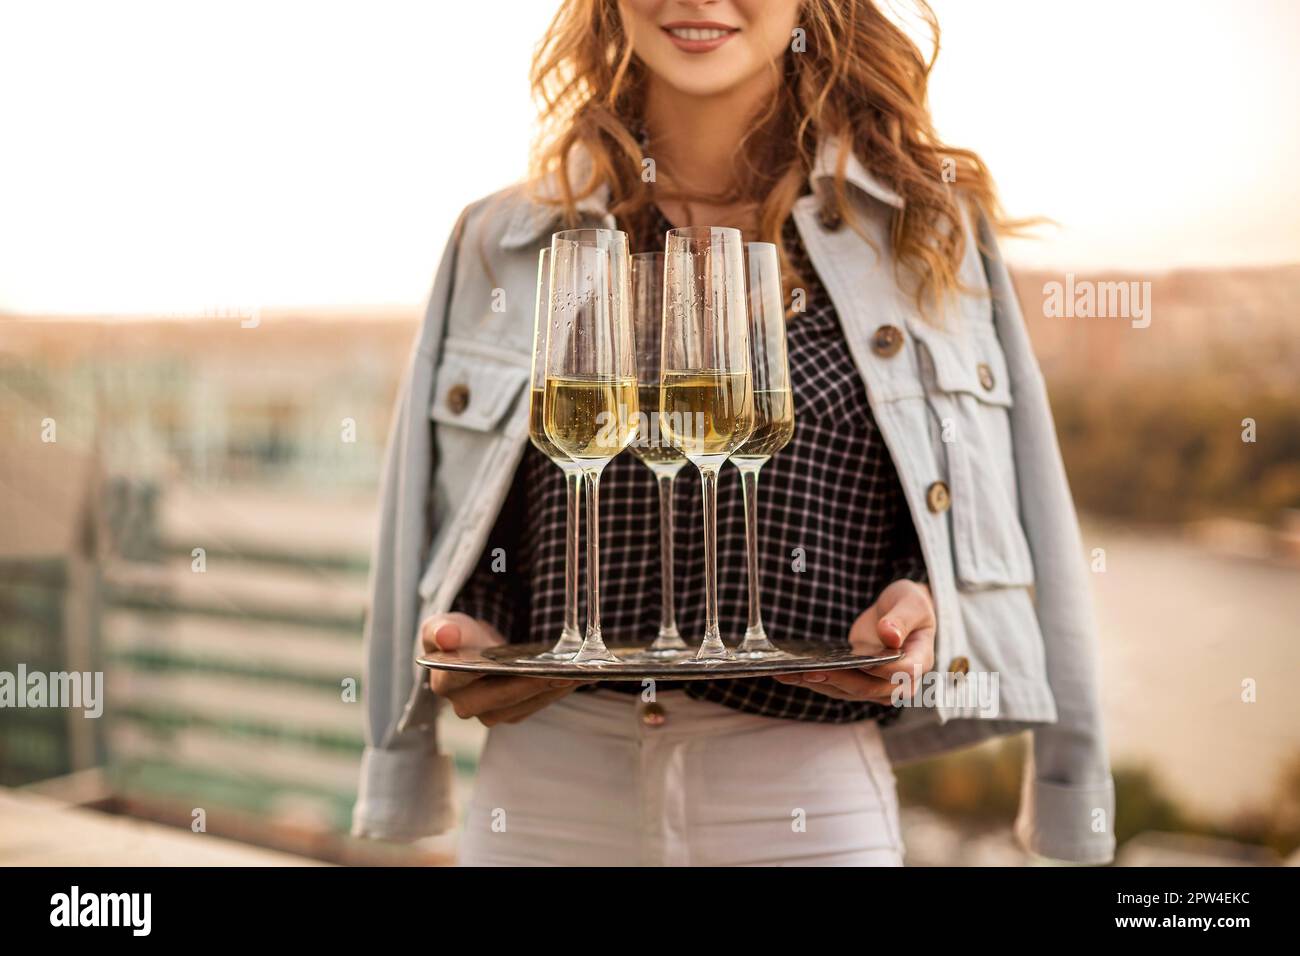 Young blonde smiling woman holding tray with champagne sparkling wine in flute glasses, standing outdoors over blurred countryside background Stock Photo